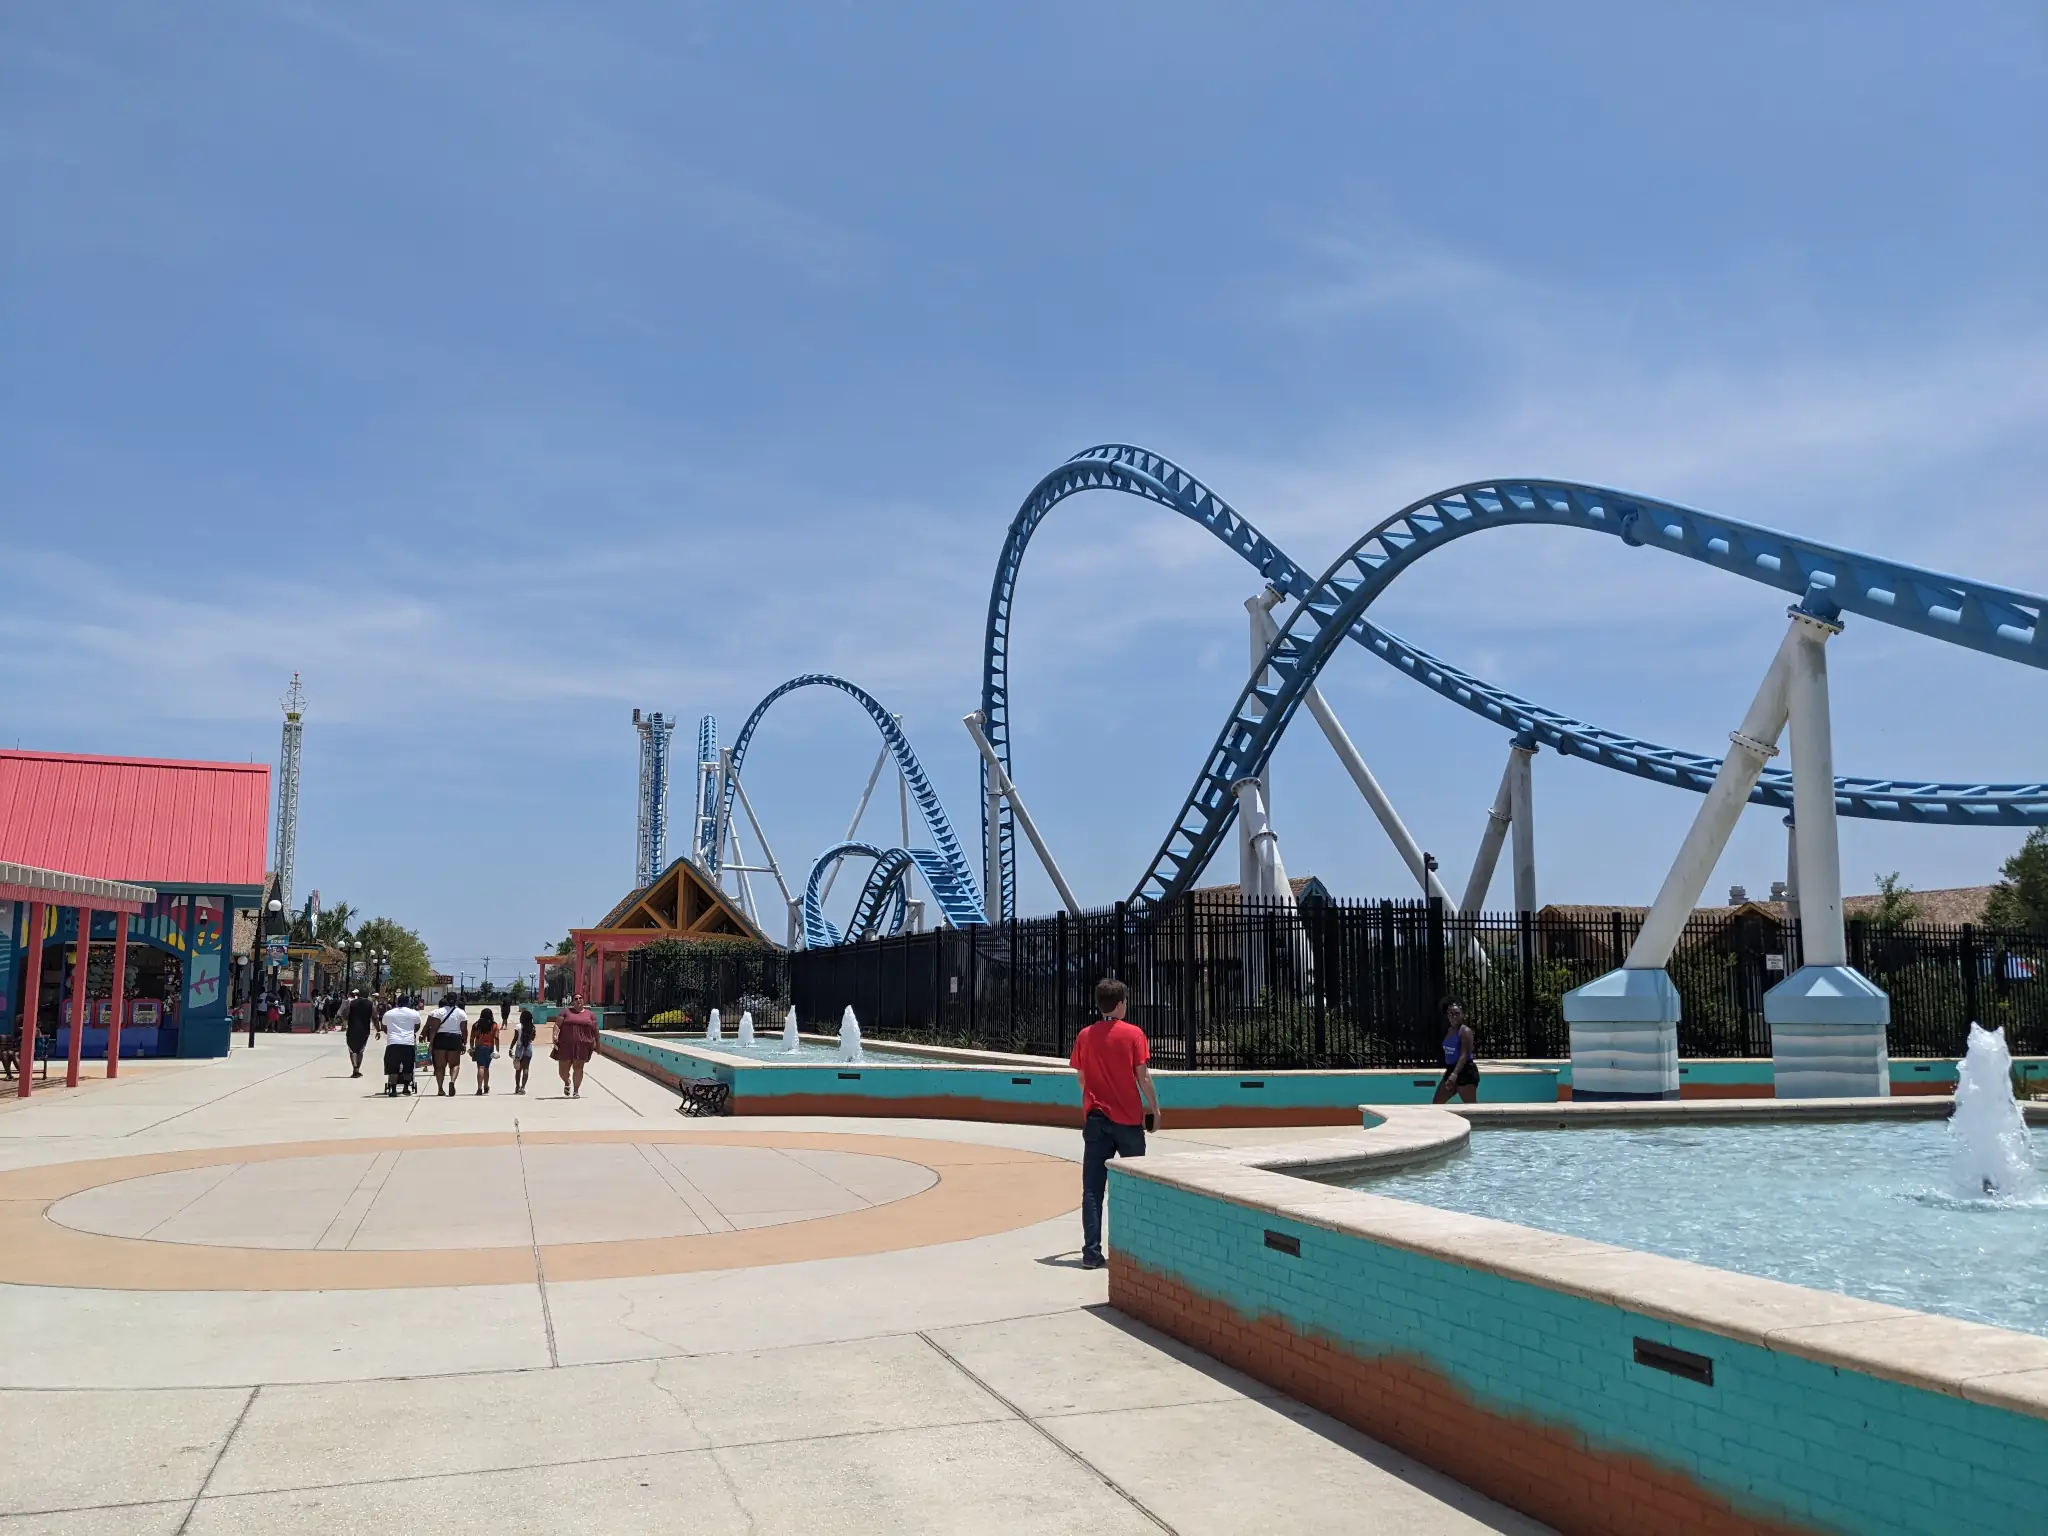 View of a long blue roller coaster.